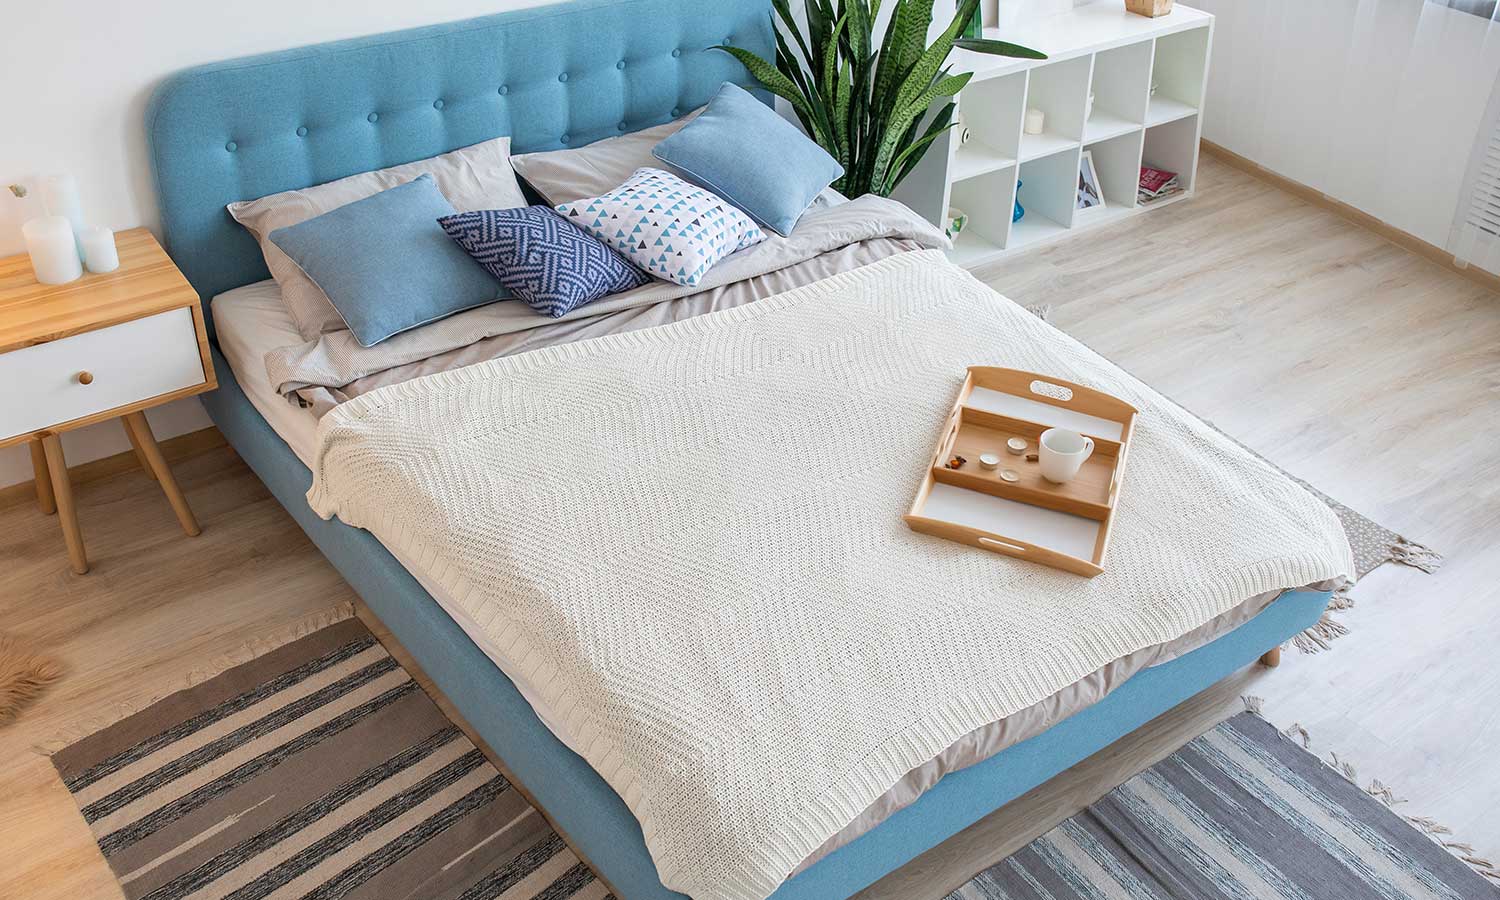 5 Ways You Can Make Your Mattress More Durable